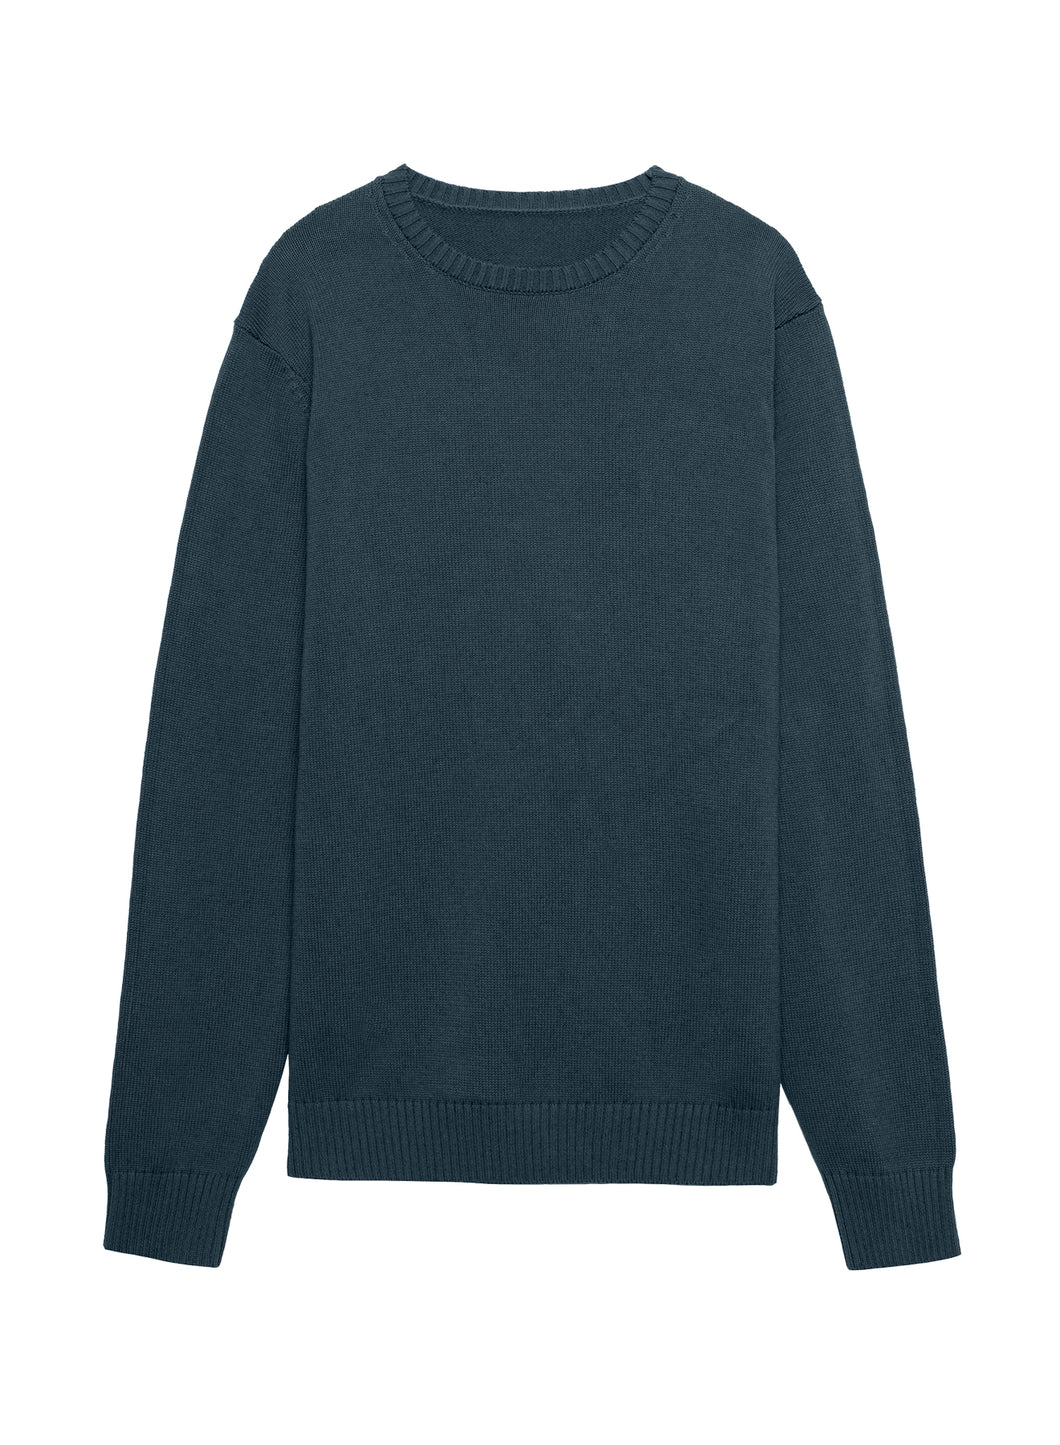 Sweater Tailalf Knit